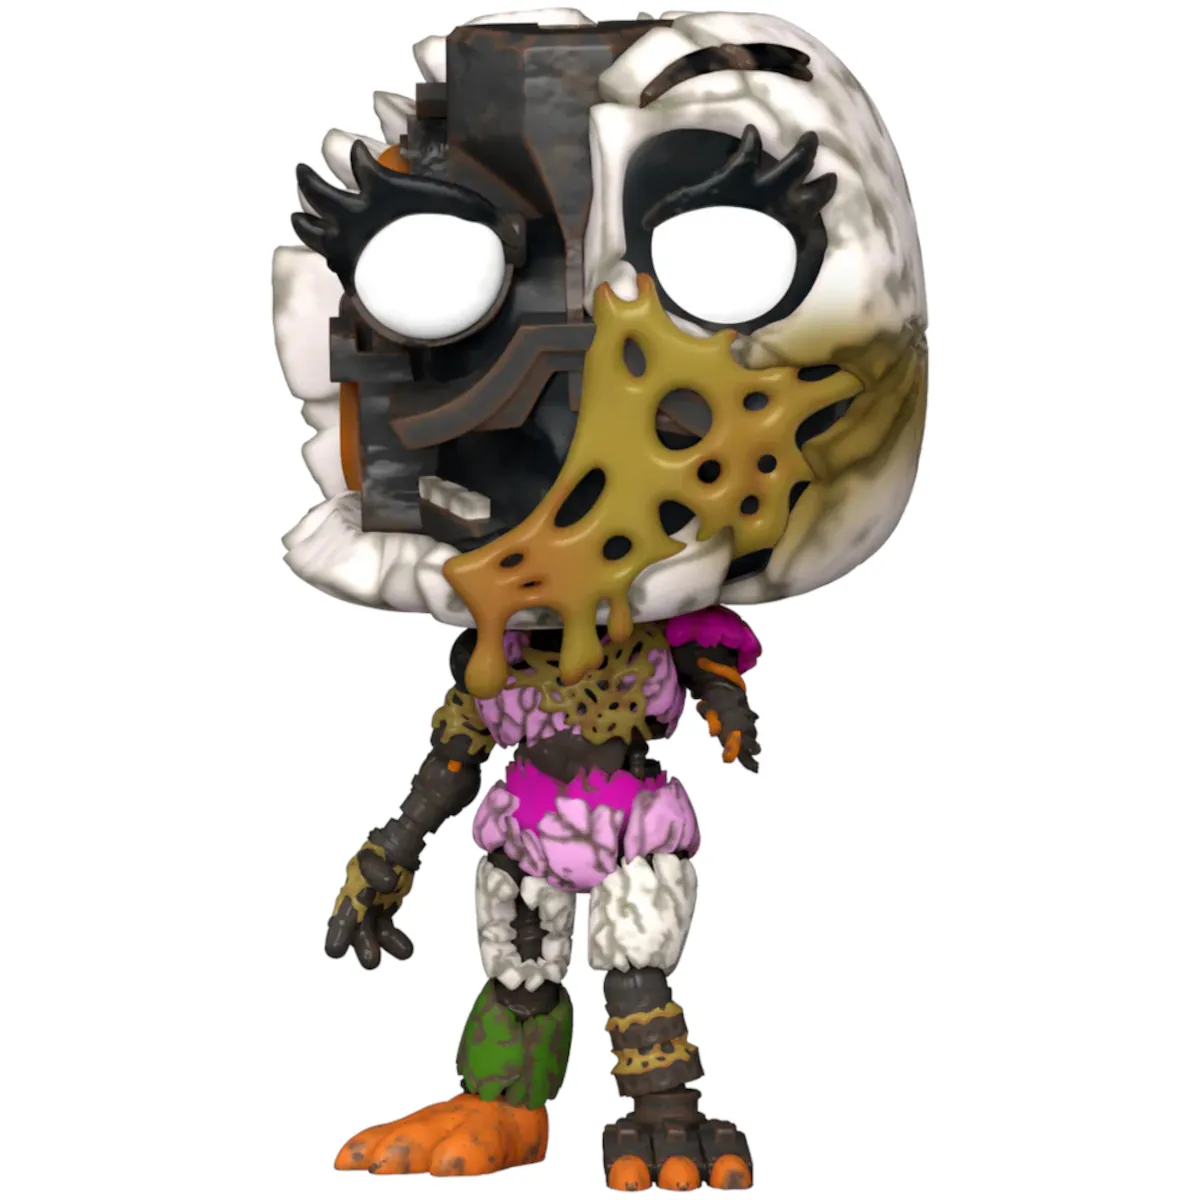 72471 Funko Pop! Games - Five Nights at Freddy's - Ruined Chica Collectable Vinyl Figure